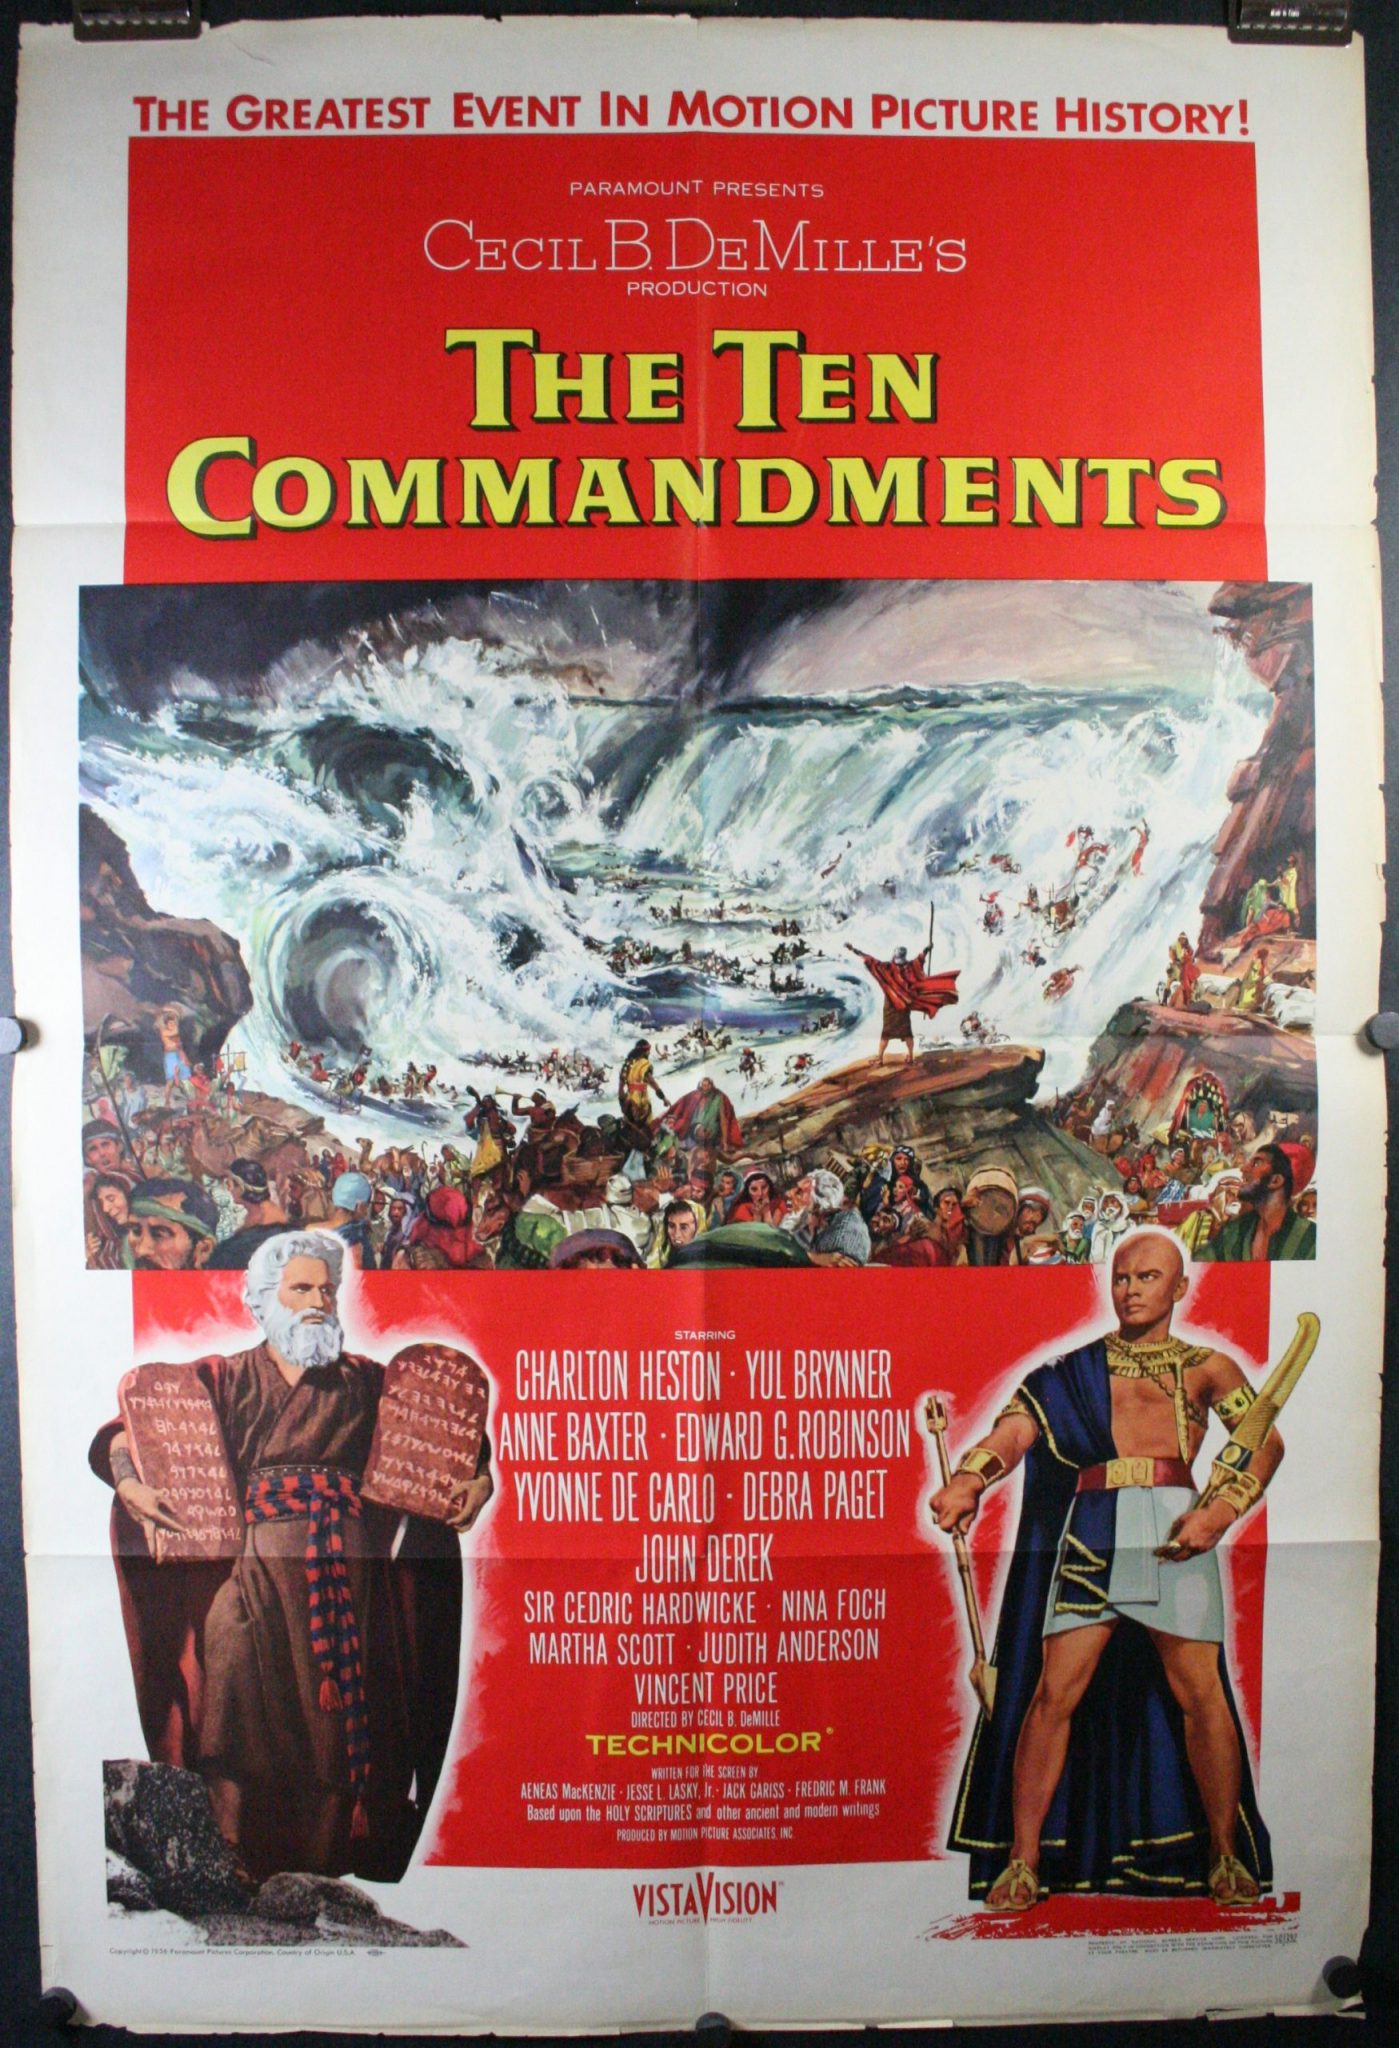 how long is the ten commandments movie